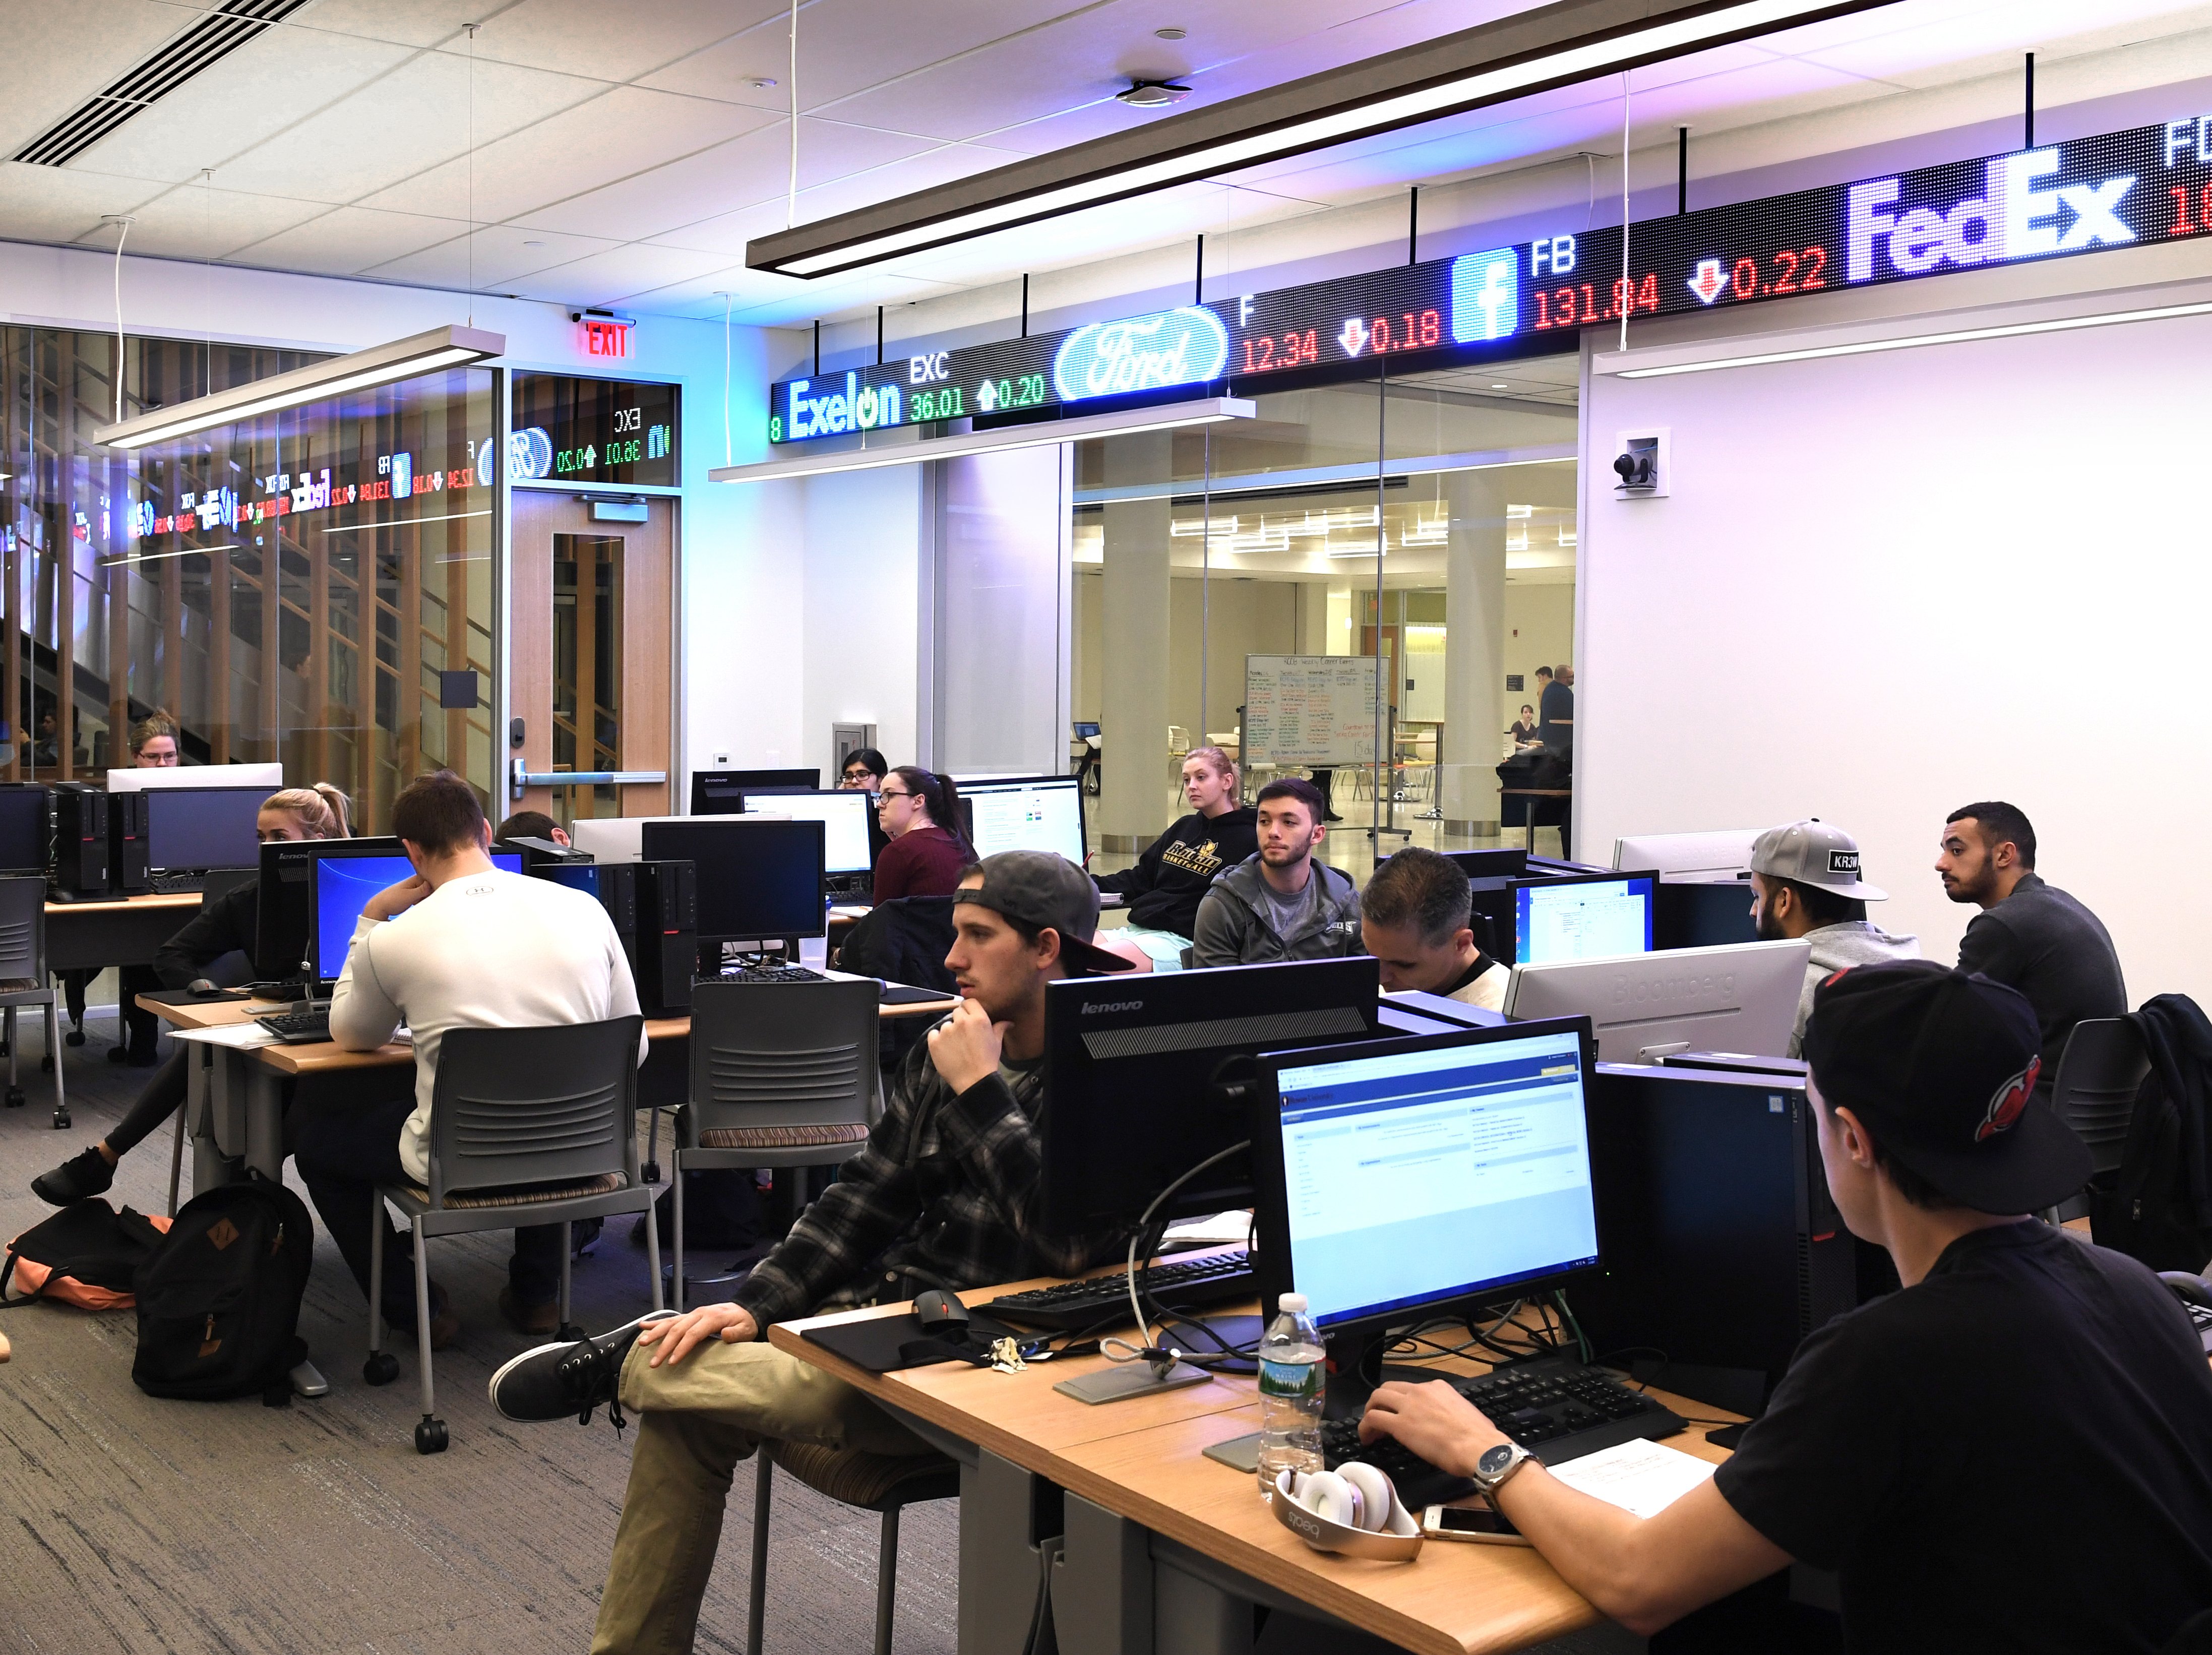 Class taking place in the trading room in business hall